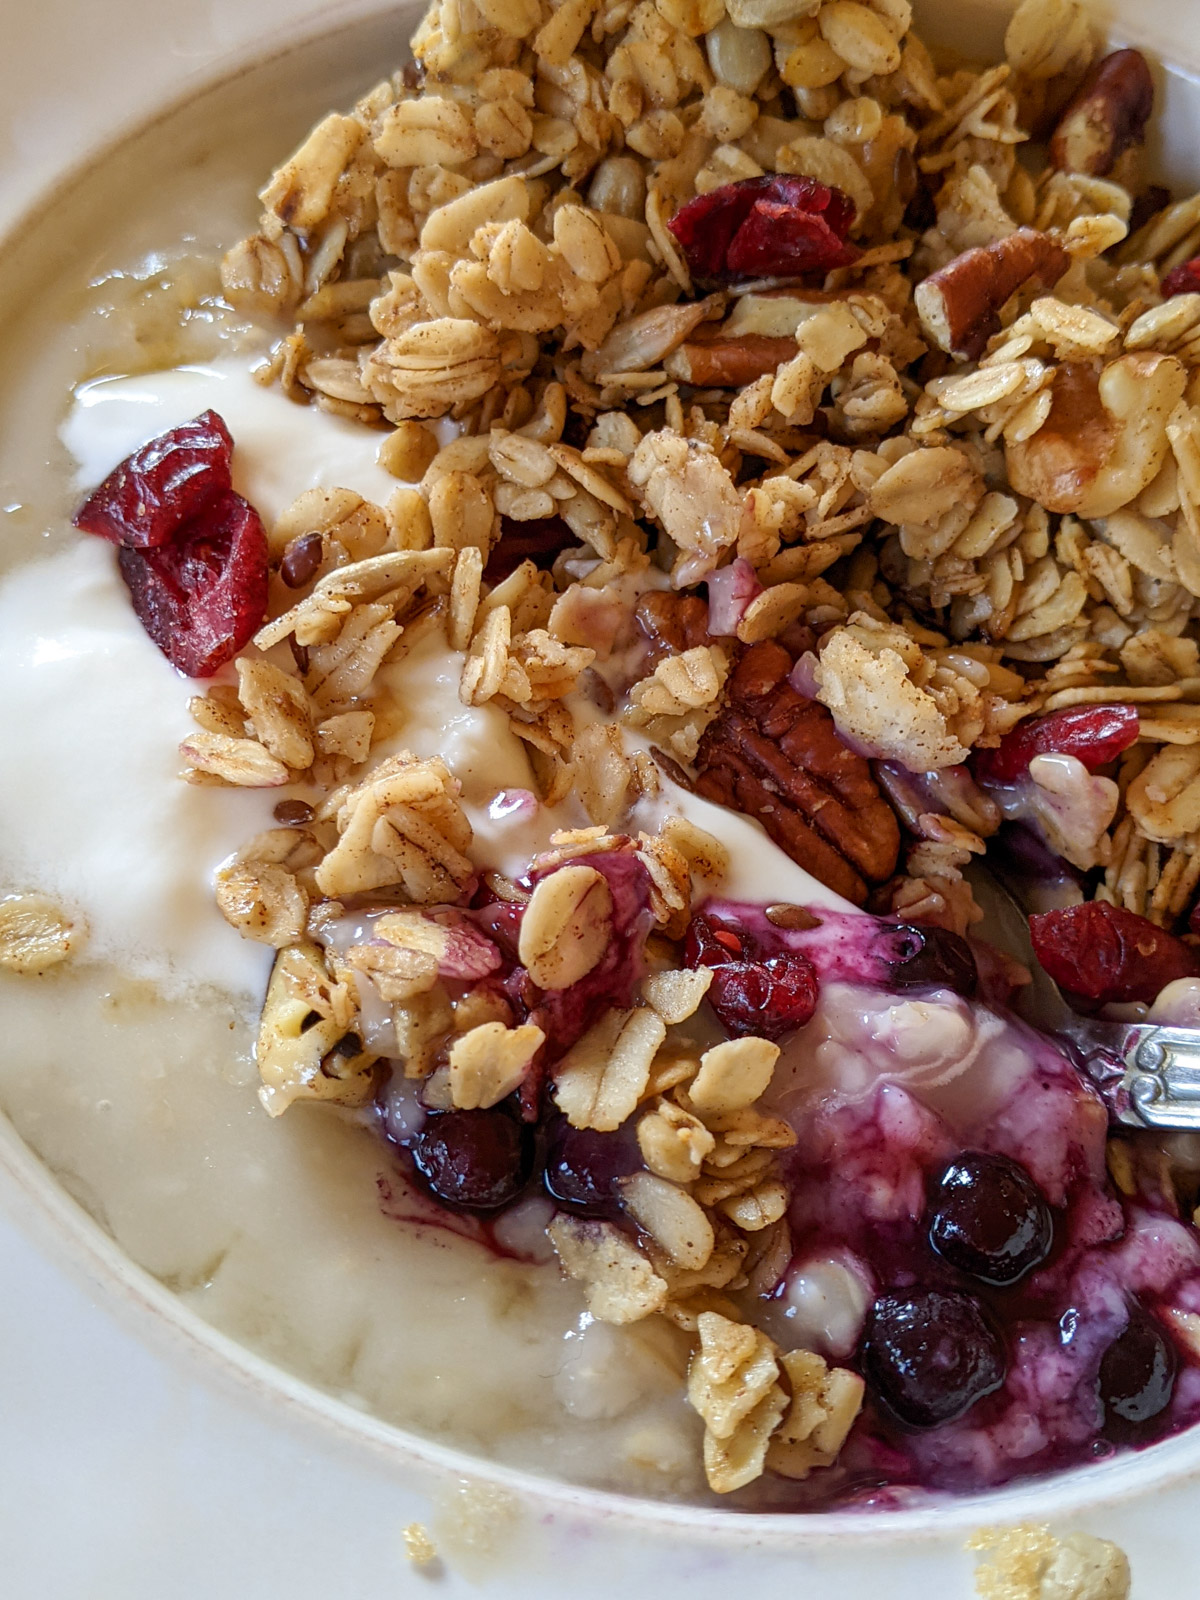 A bowl of oatmeal with blueberries and yogurt topped with homemade granola.